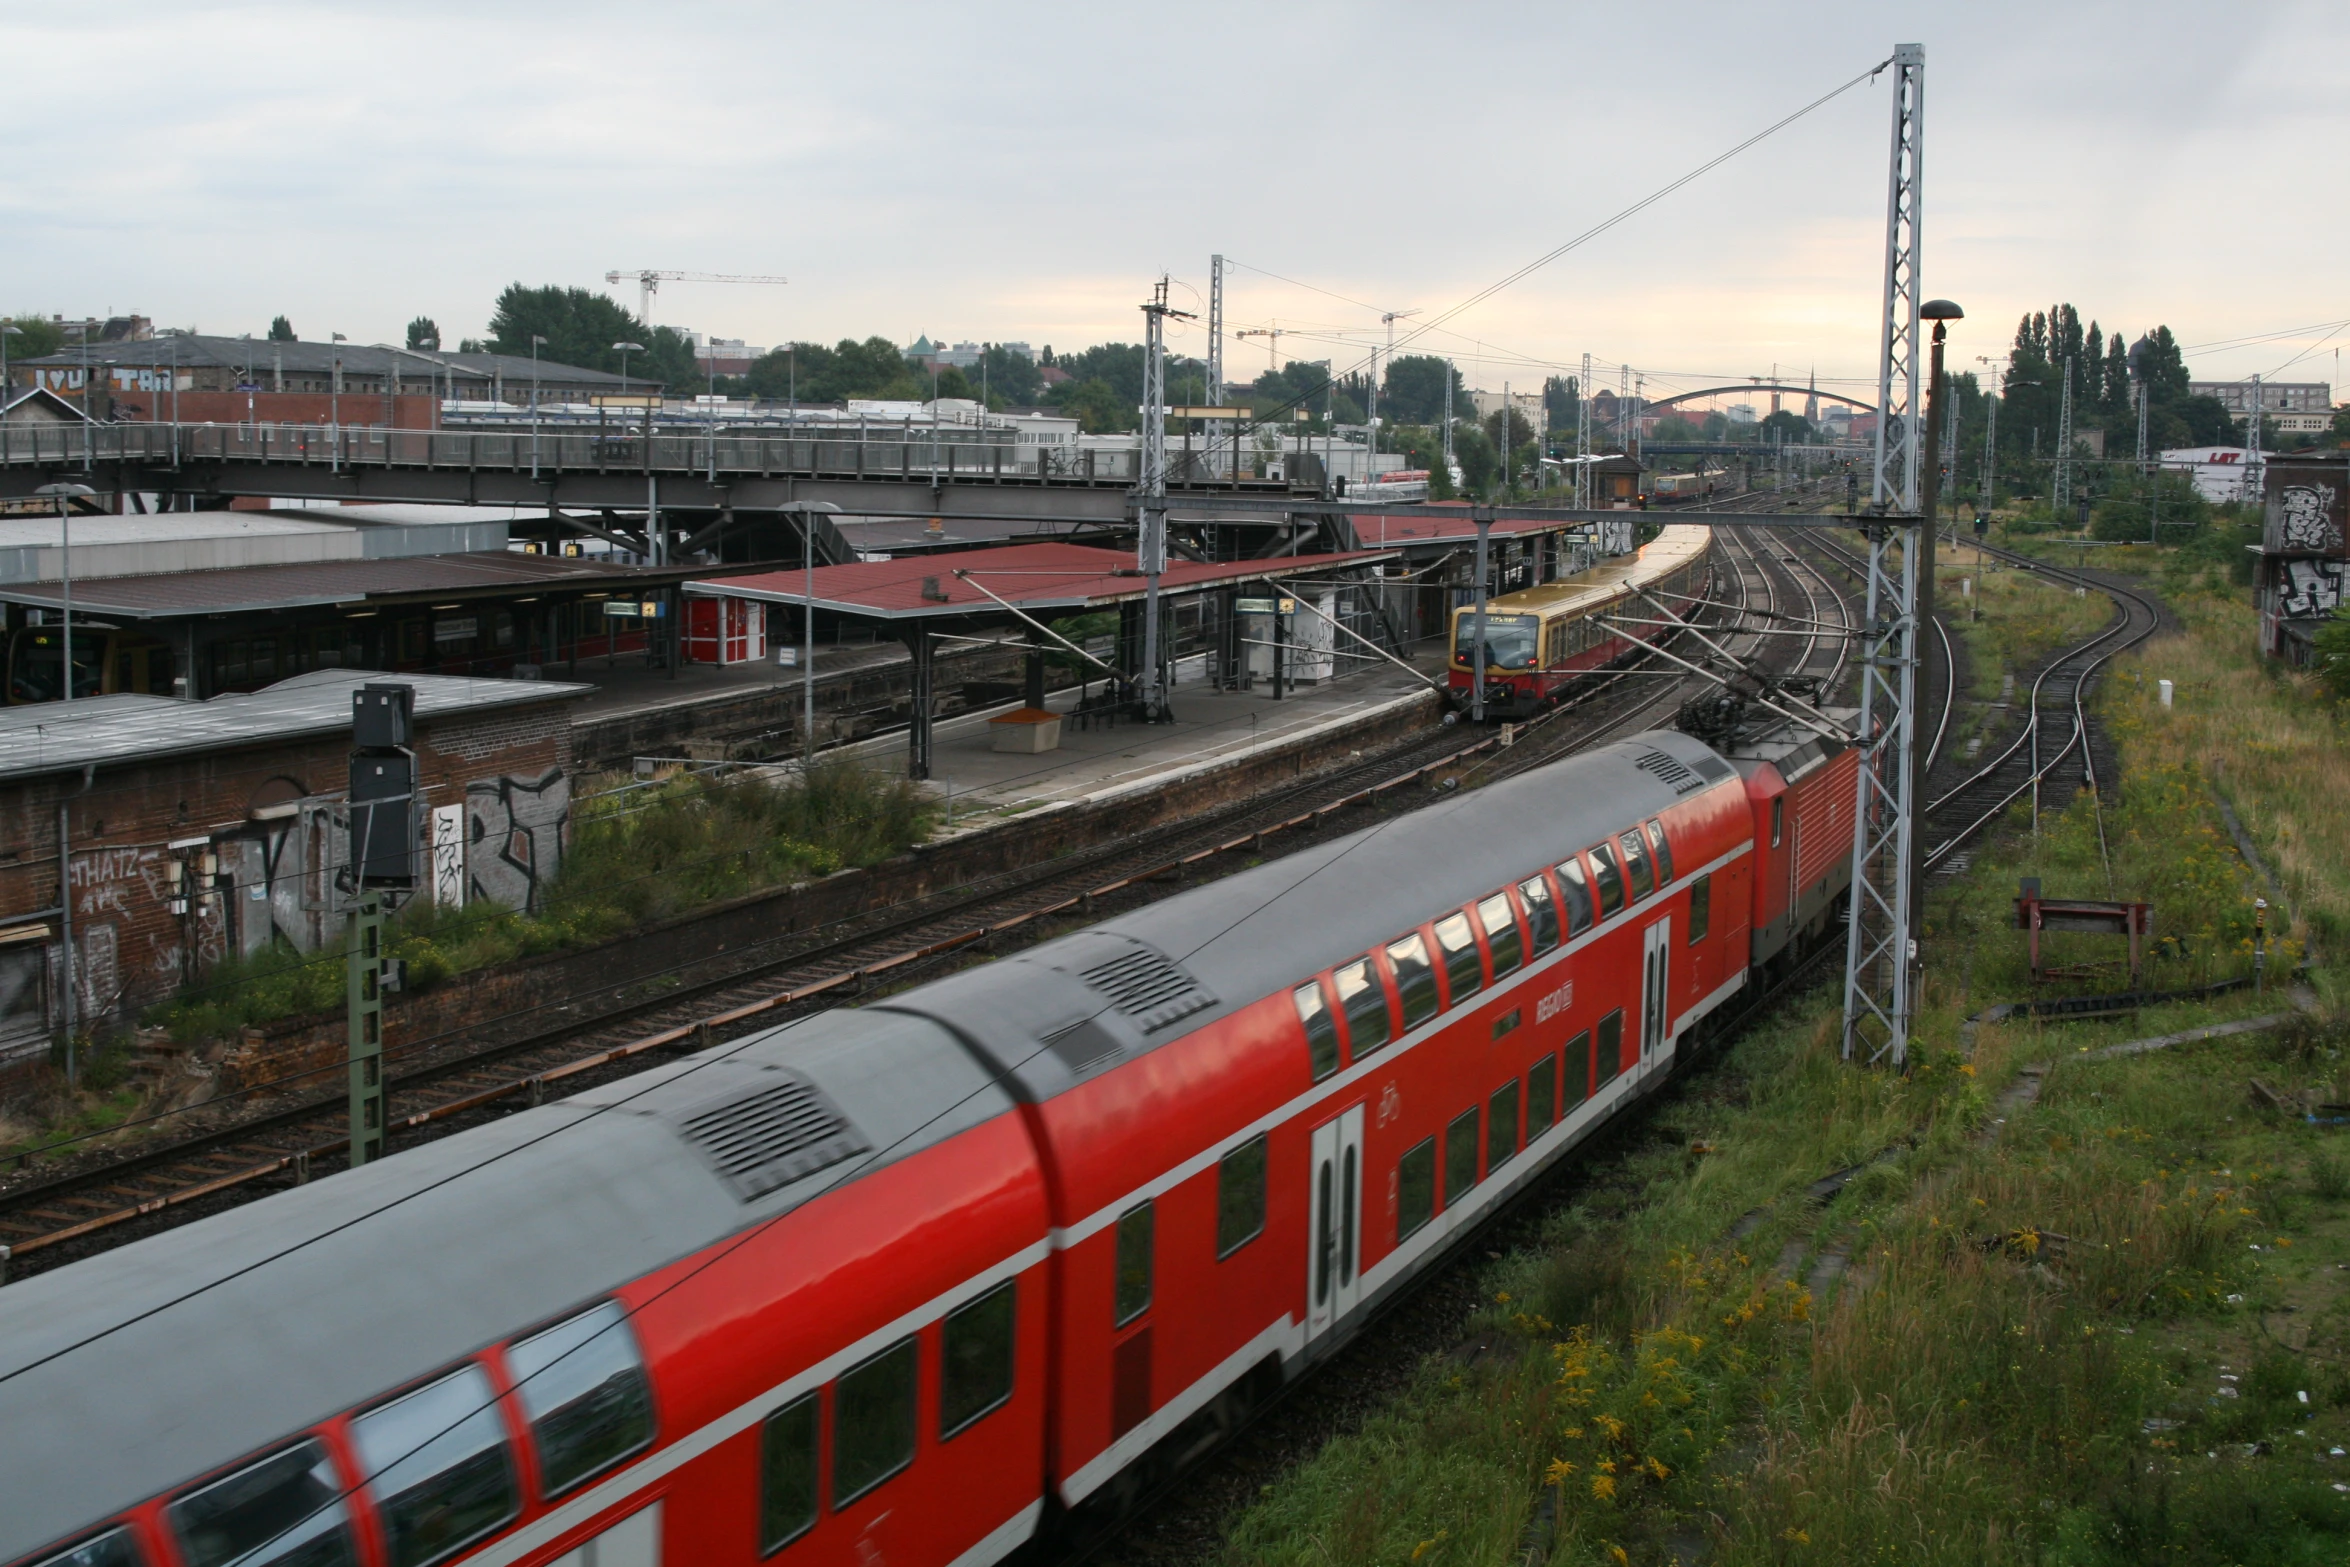 a red train going down the tracks next to buildings